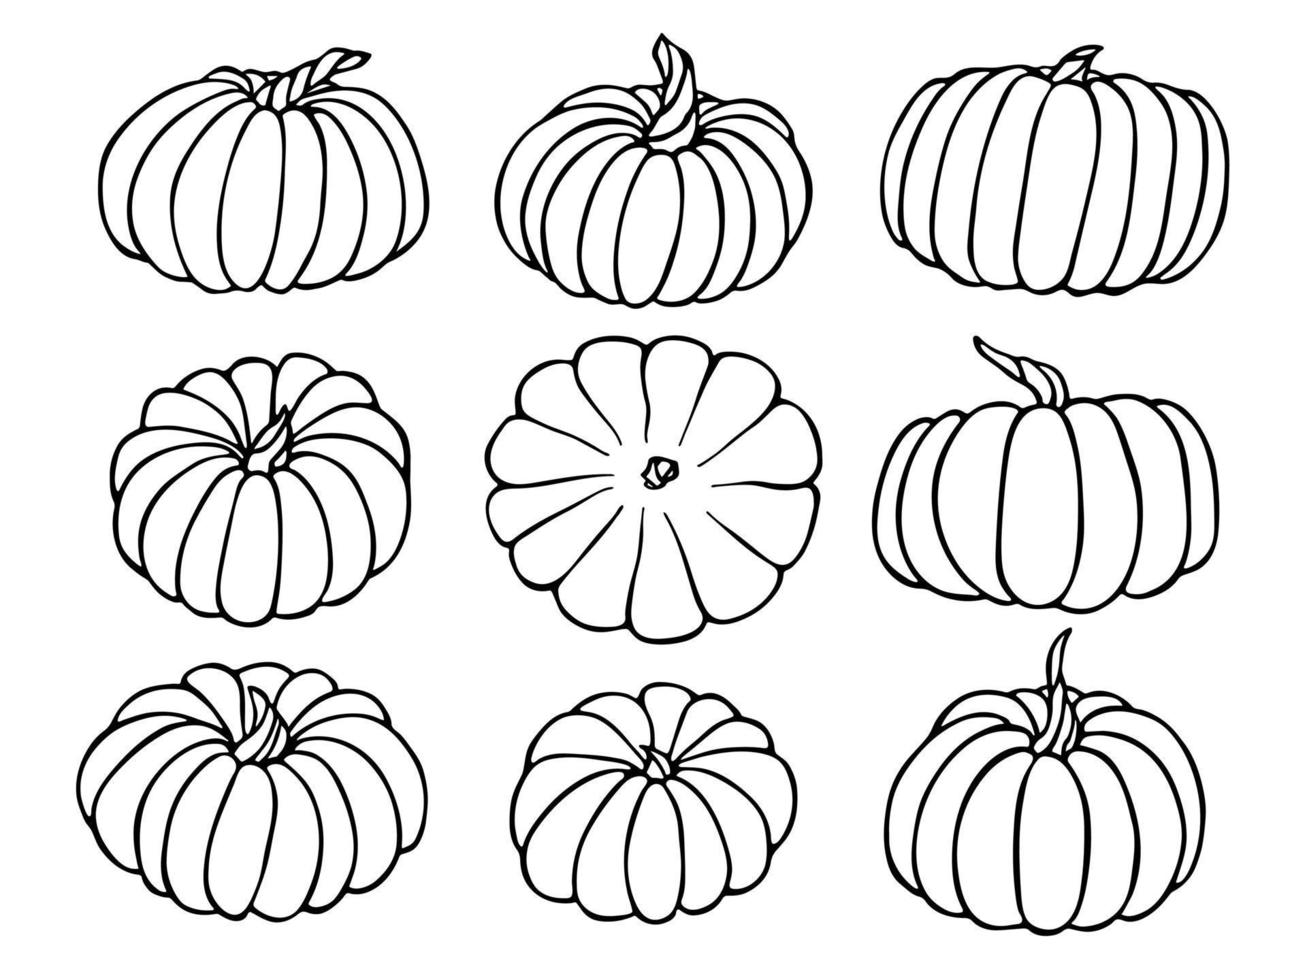 Vector hand drawn set of pumpkin illustration. Isolated object on white background. Vegetable harvest clipart. Farm market product. Elements for autumn design, decoration.